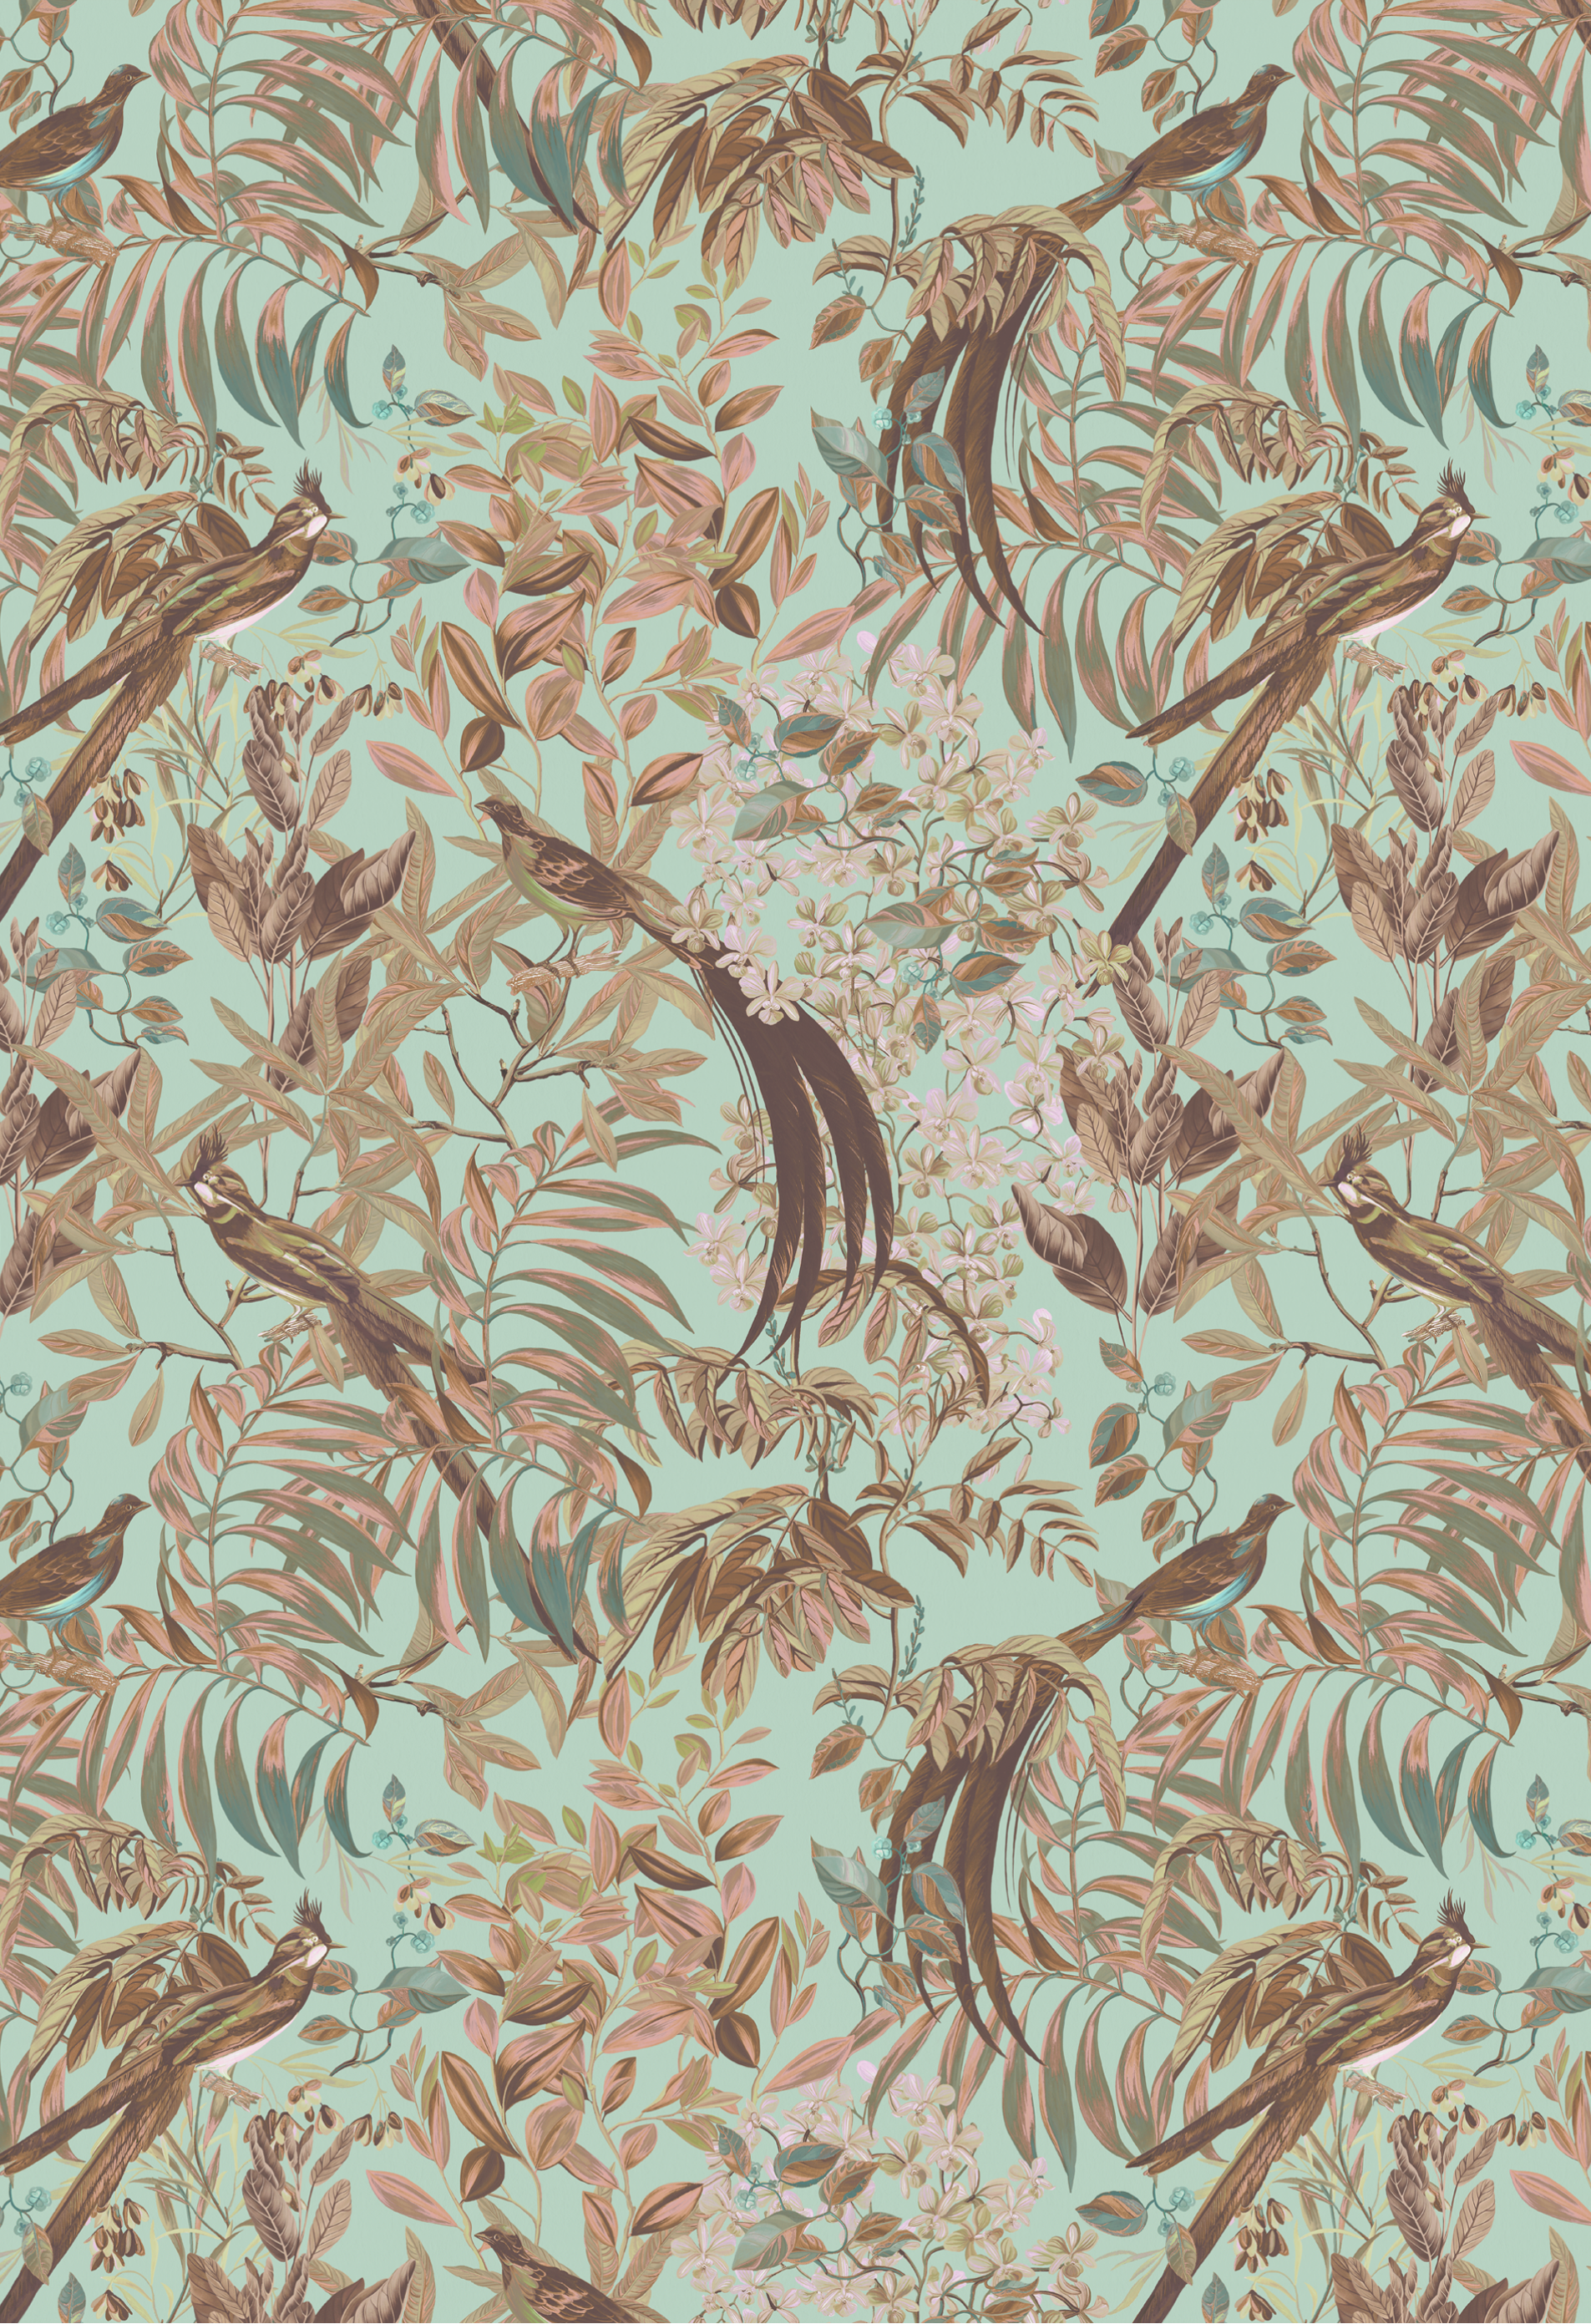 Painted bird and floral wallpaper surrounded by leafy branches and palms from Deus ex Gardenia of Resplendent Woods Wallpaper in Teal.